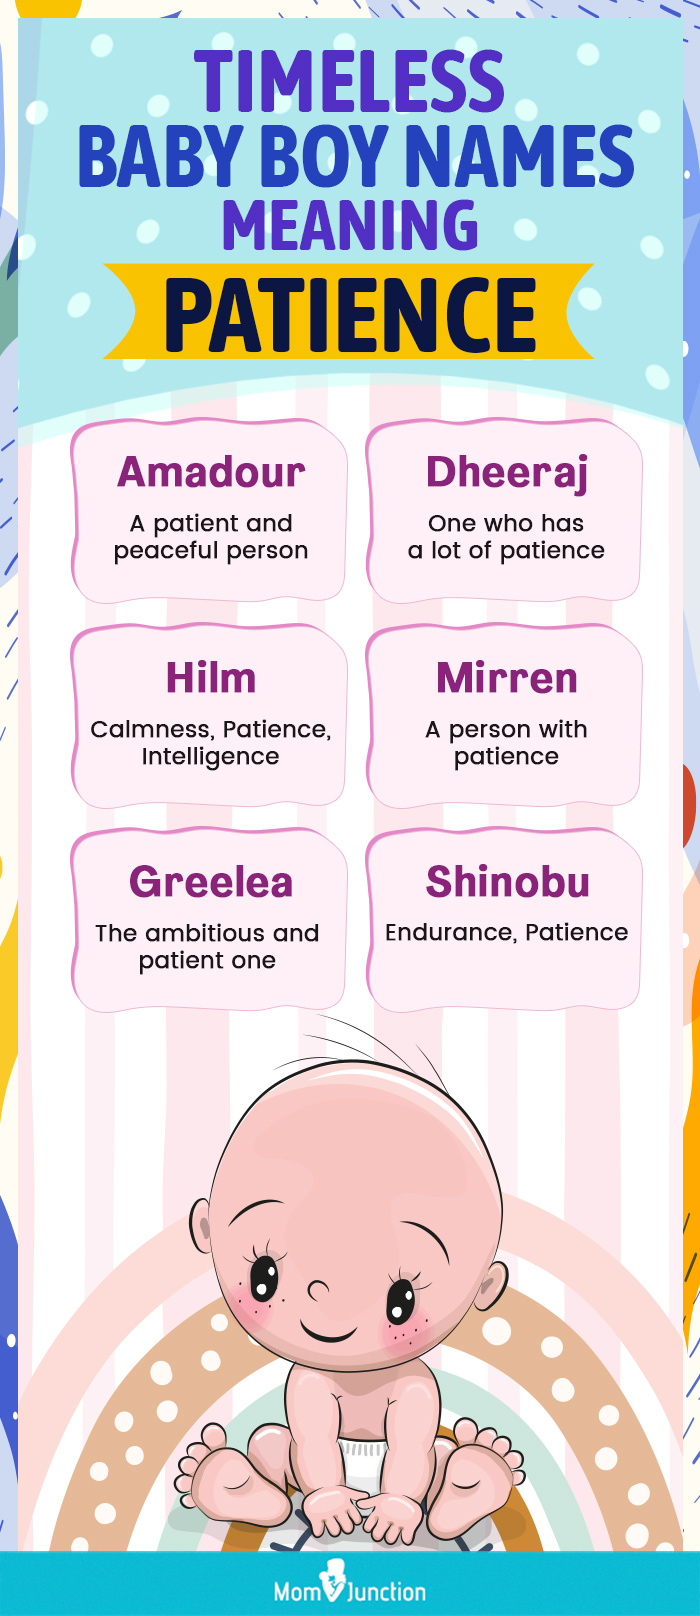 timeless baby boy names meaning patience (infographic)